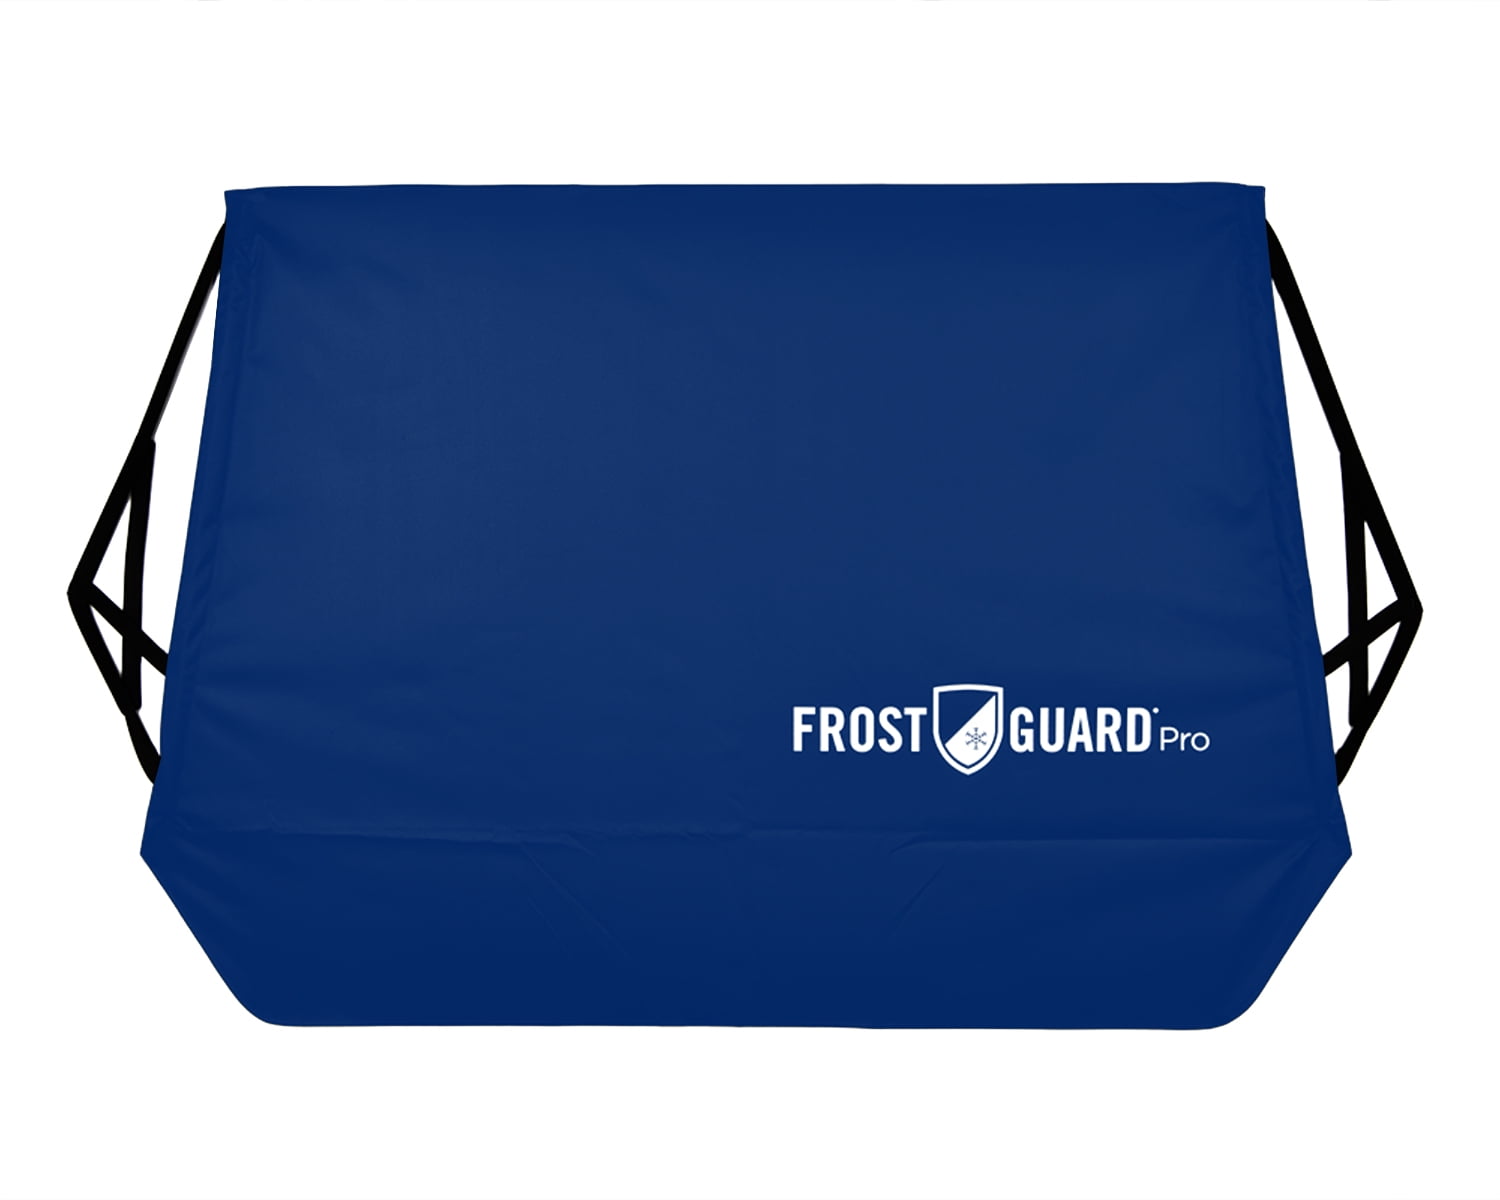 FrostGuard Pro Automotive Winter Windshield Cover for Cars and Smaller SUVs (Indigo) $10.10  + Free S&H w/ Walmart+ or $35+